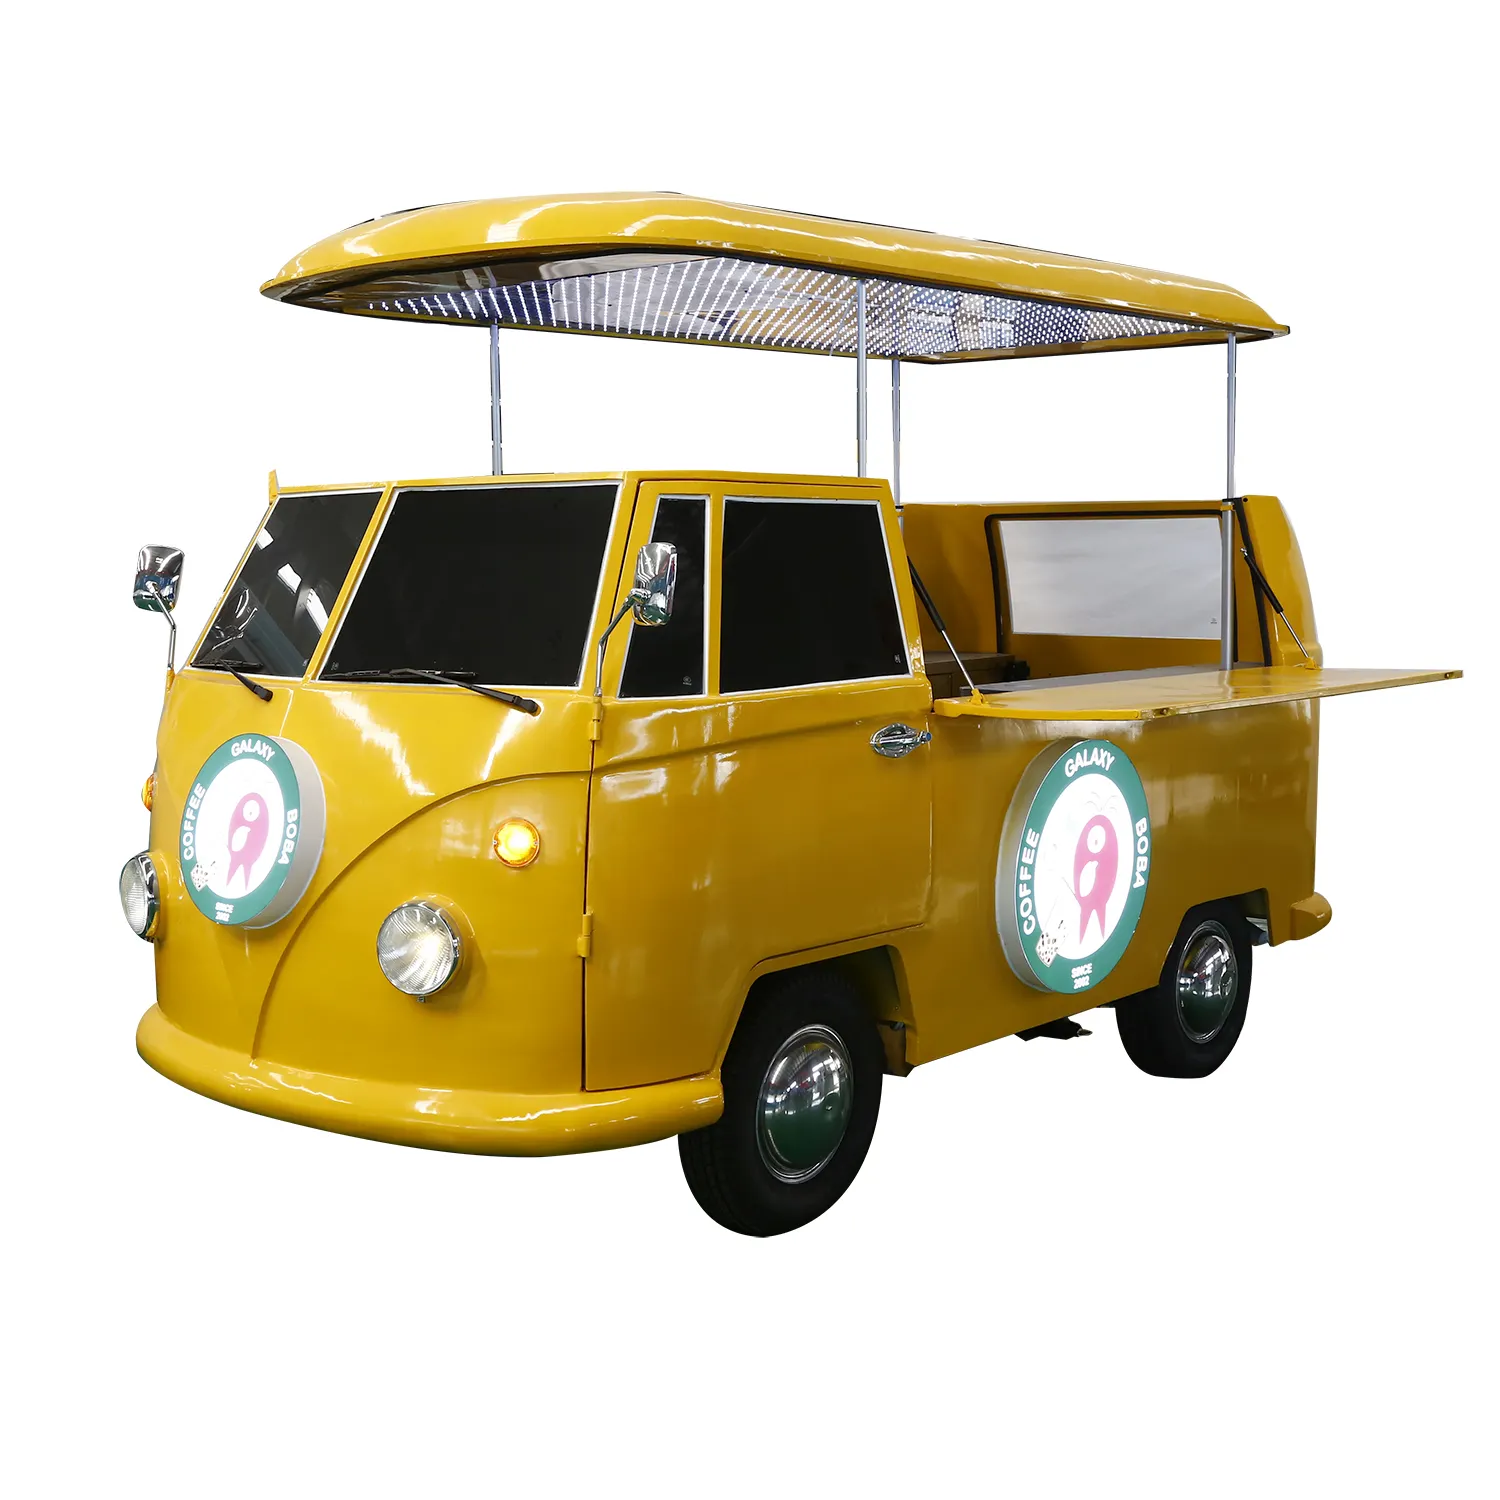 China Supplier Colorful Street Mobile Food Cart Food Truck Parts Truck Fast Food Cart Truck